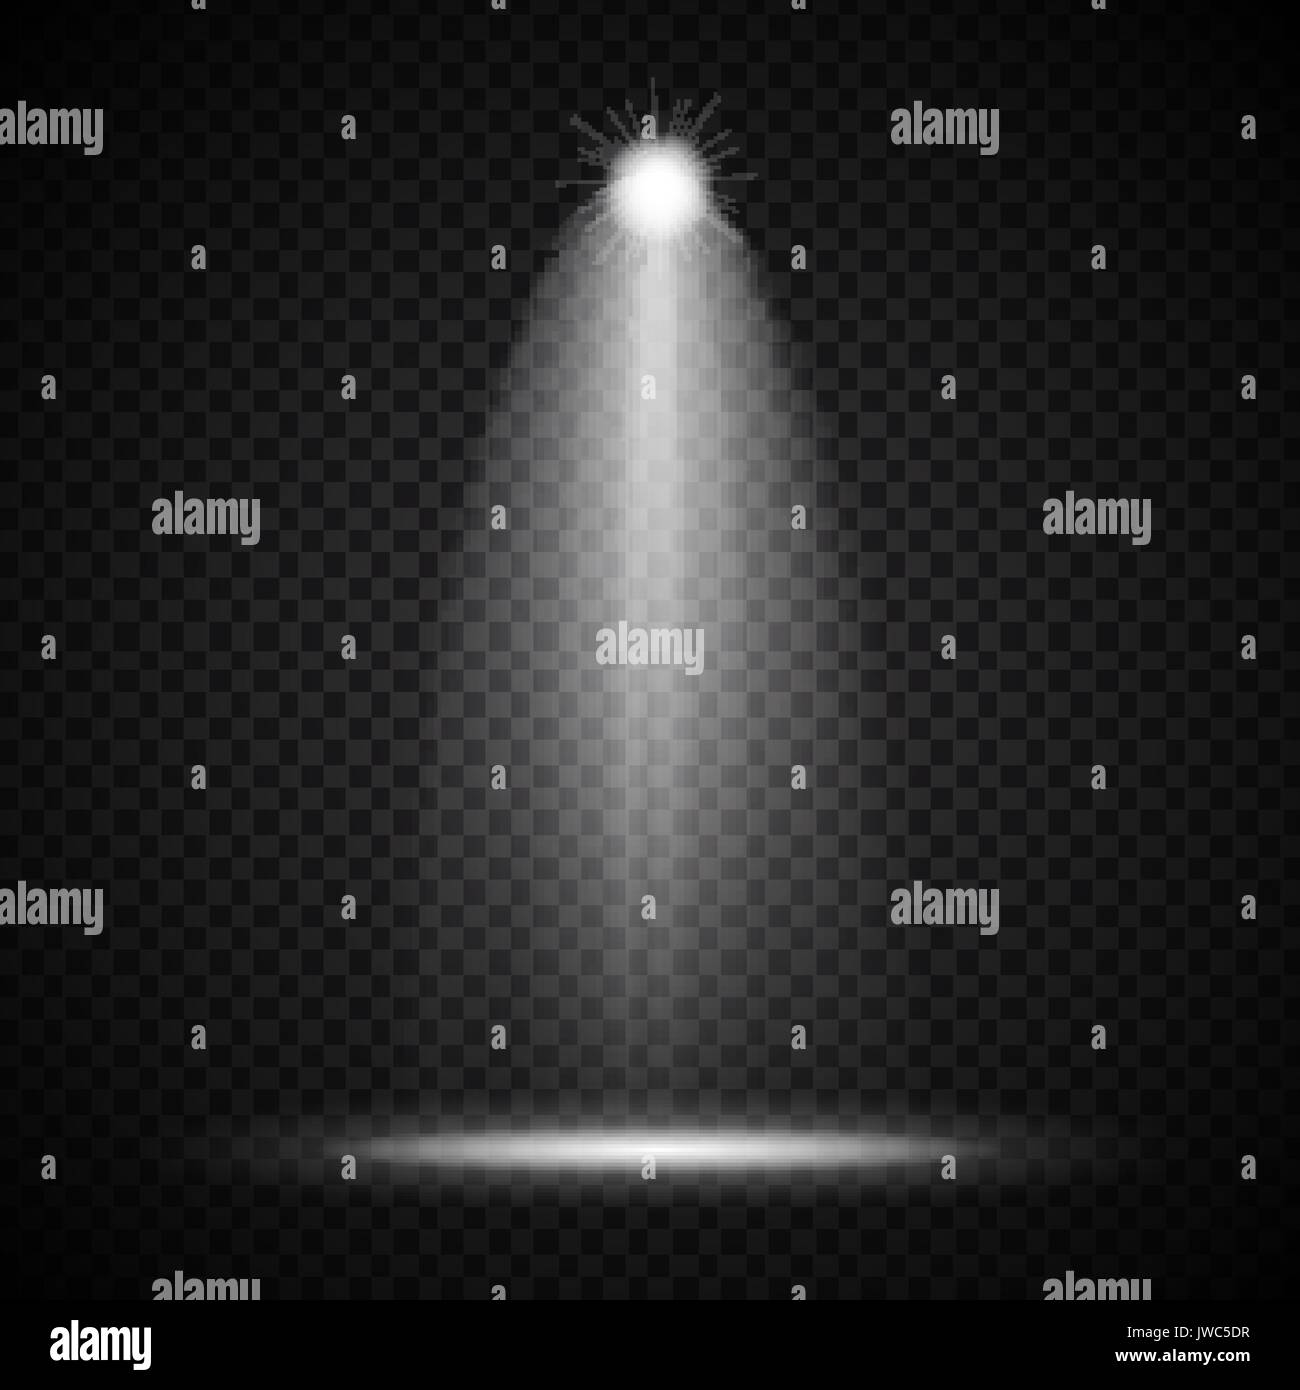 Realistic Bright Projectors Lighting Lamp with Spotlights Lighting Effects with Transparency Isolated on Transparent Background. Vector Illustration Stock Vector